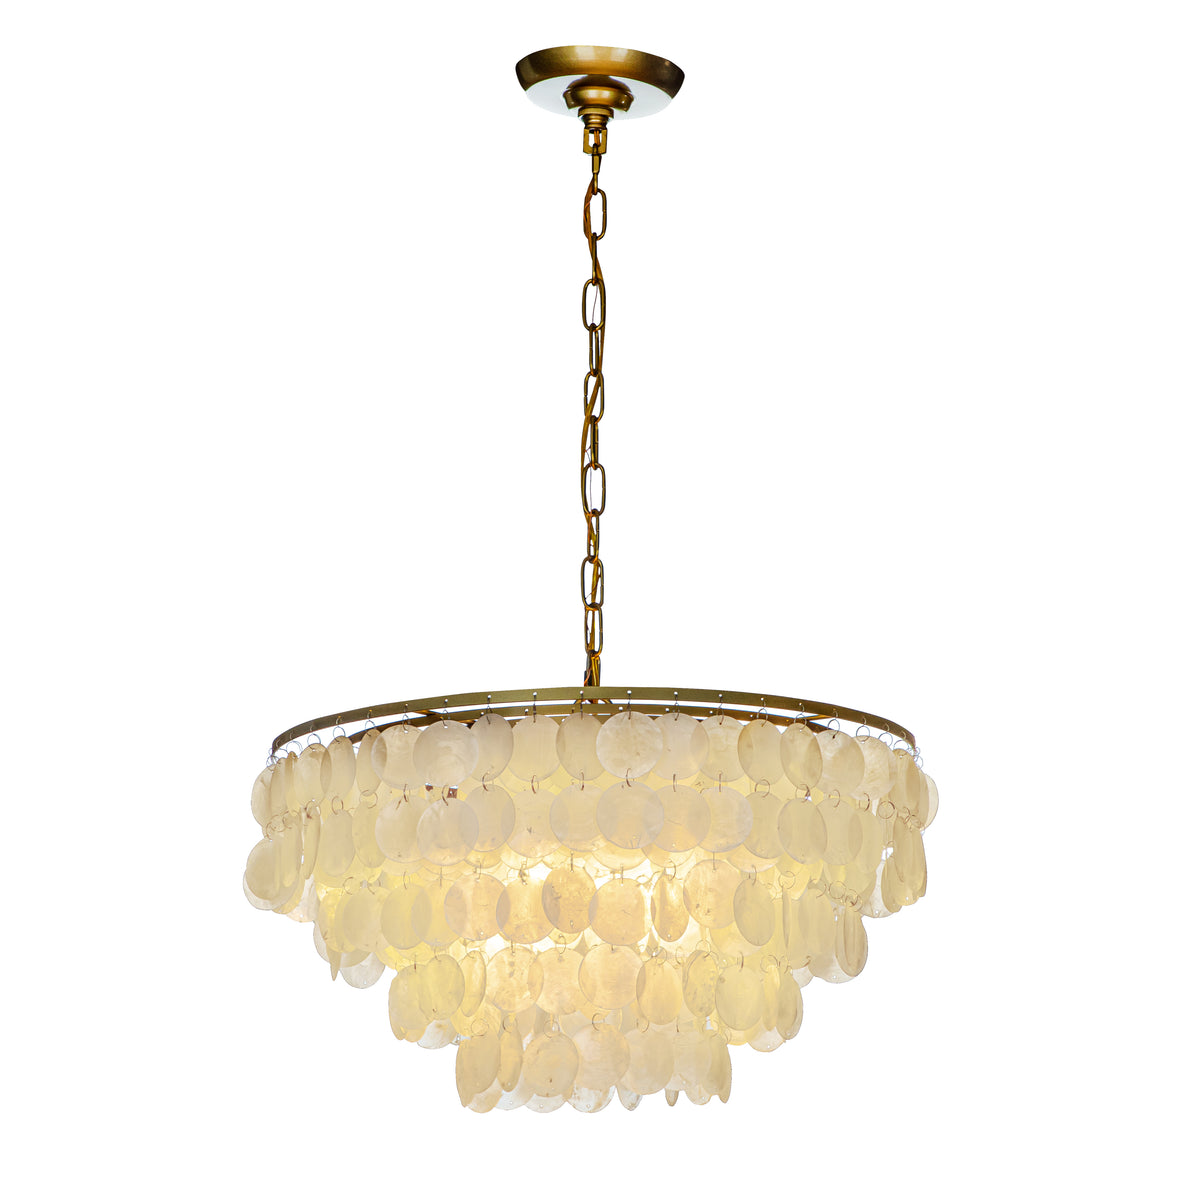 4-Light Round Coastal Capiz Shells Tiered Chandelier with Antique Gold Metal and Natural Seashell